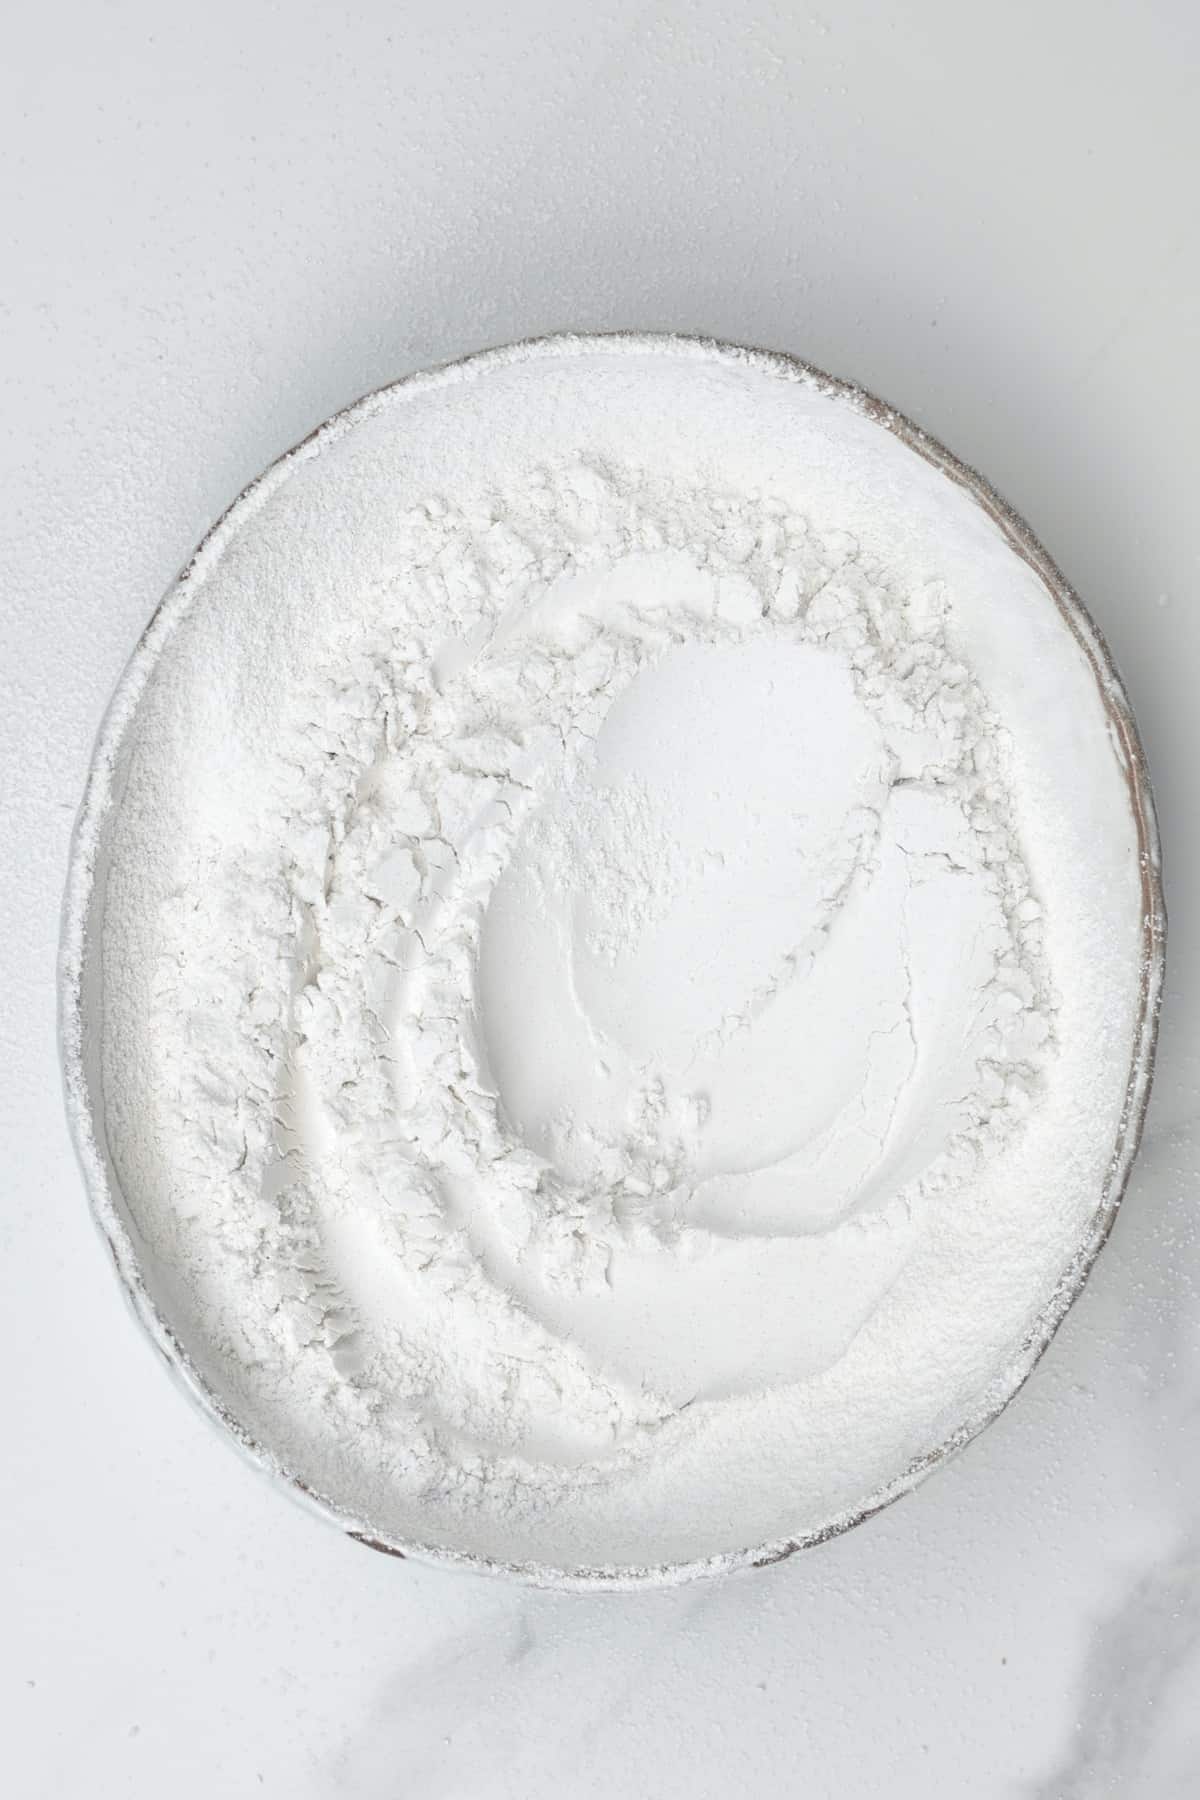 A bowl with flour starch